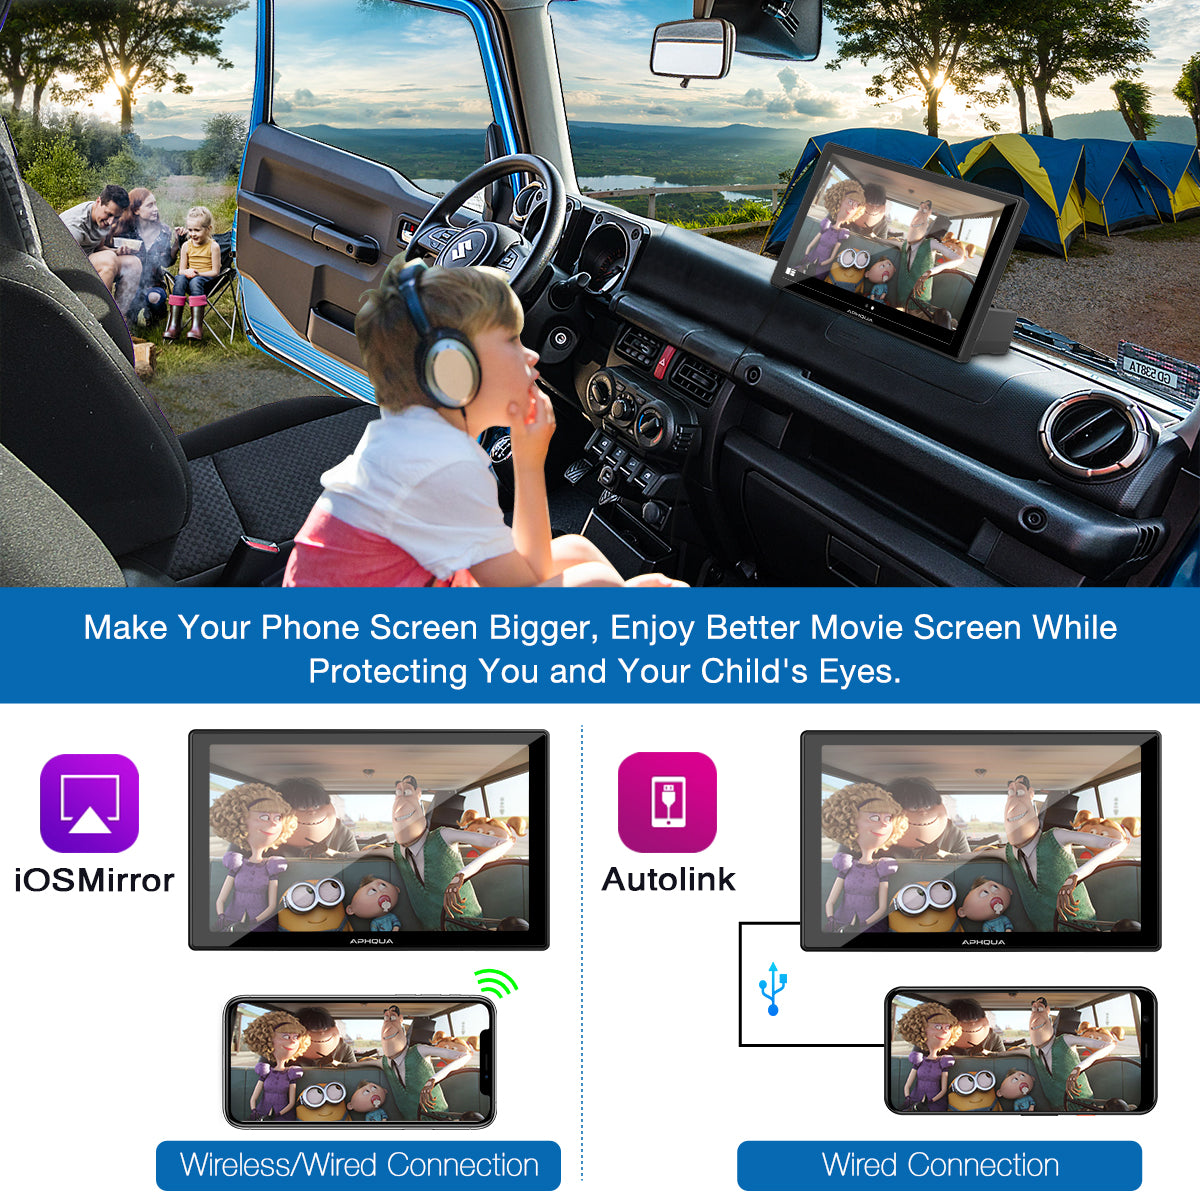 APHQUA Portable Wireless Carplay with Light-Sensing, 9 Inch IPS Touchscreen Car Stereo with Dual Speckers, Works with Carplay, Android Auto, Mirror Link, Bluetooth, Google, Siri